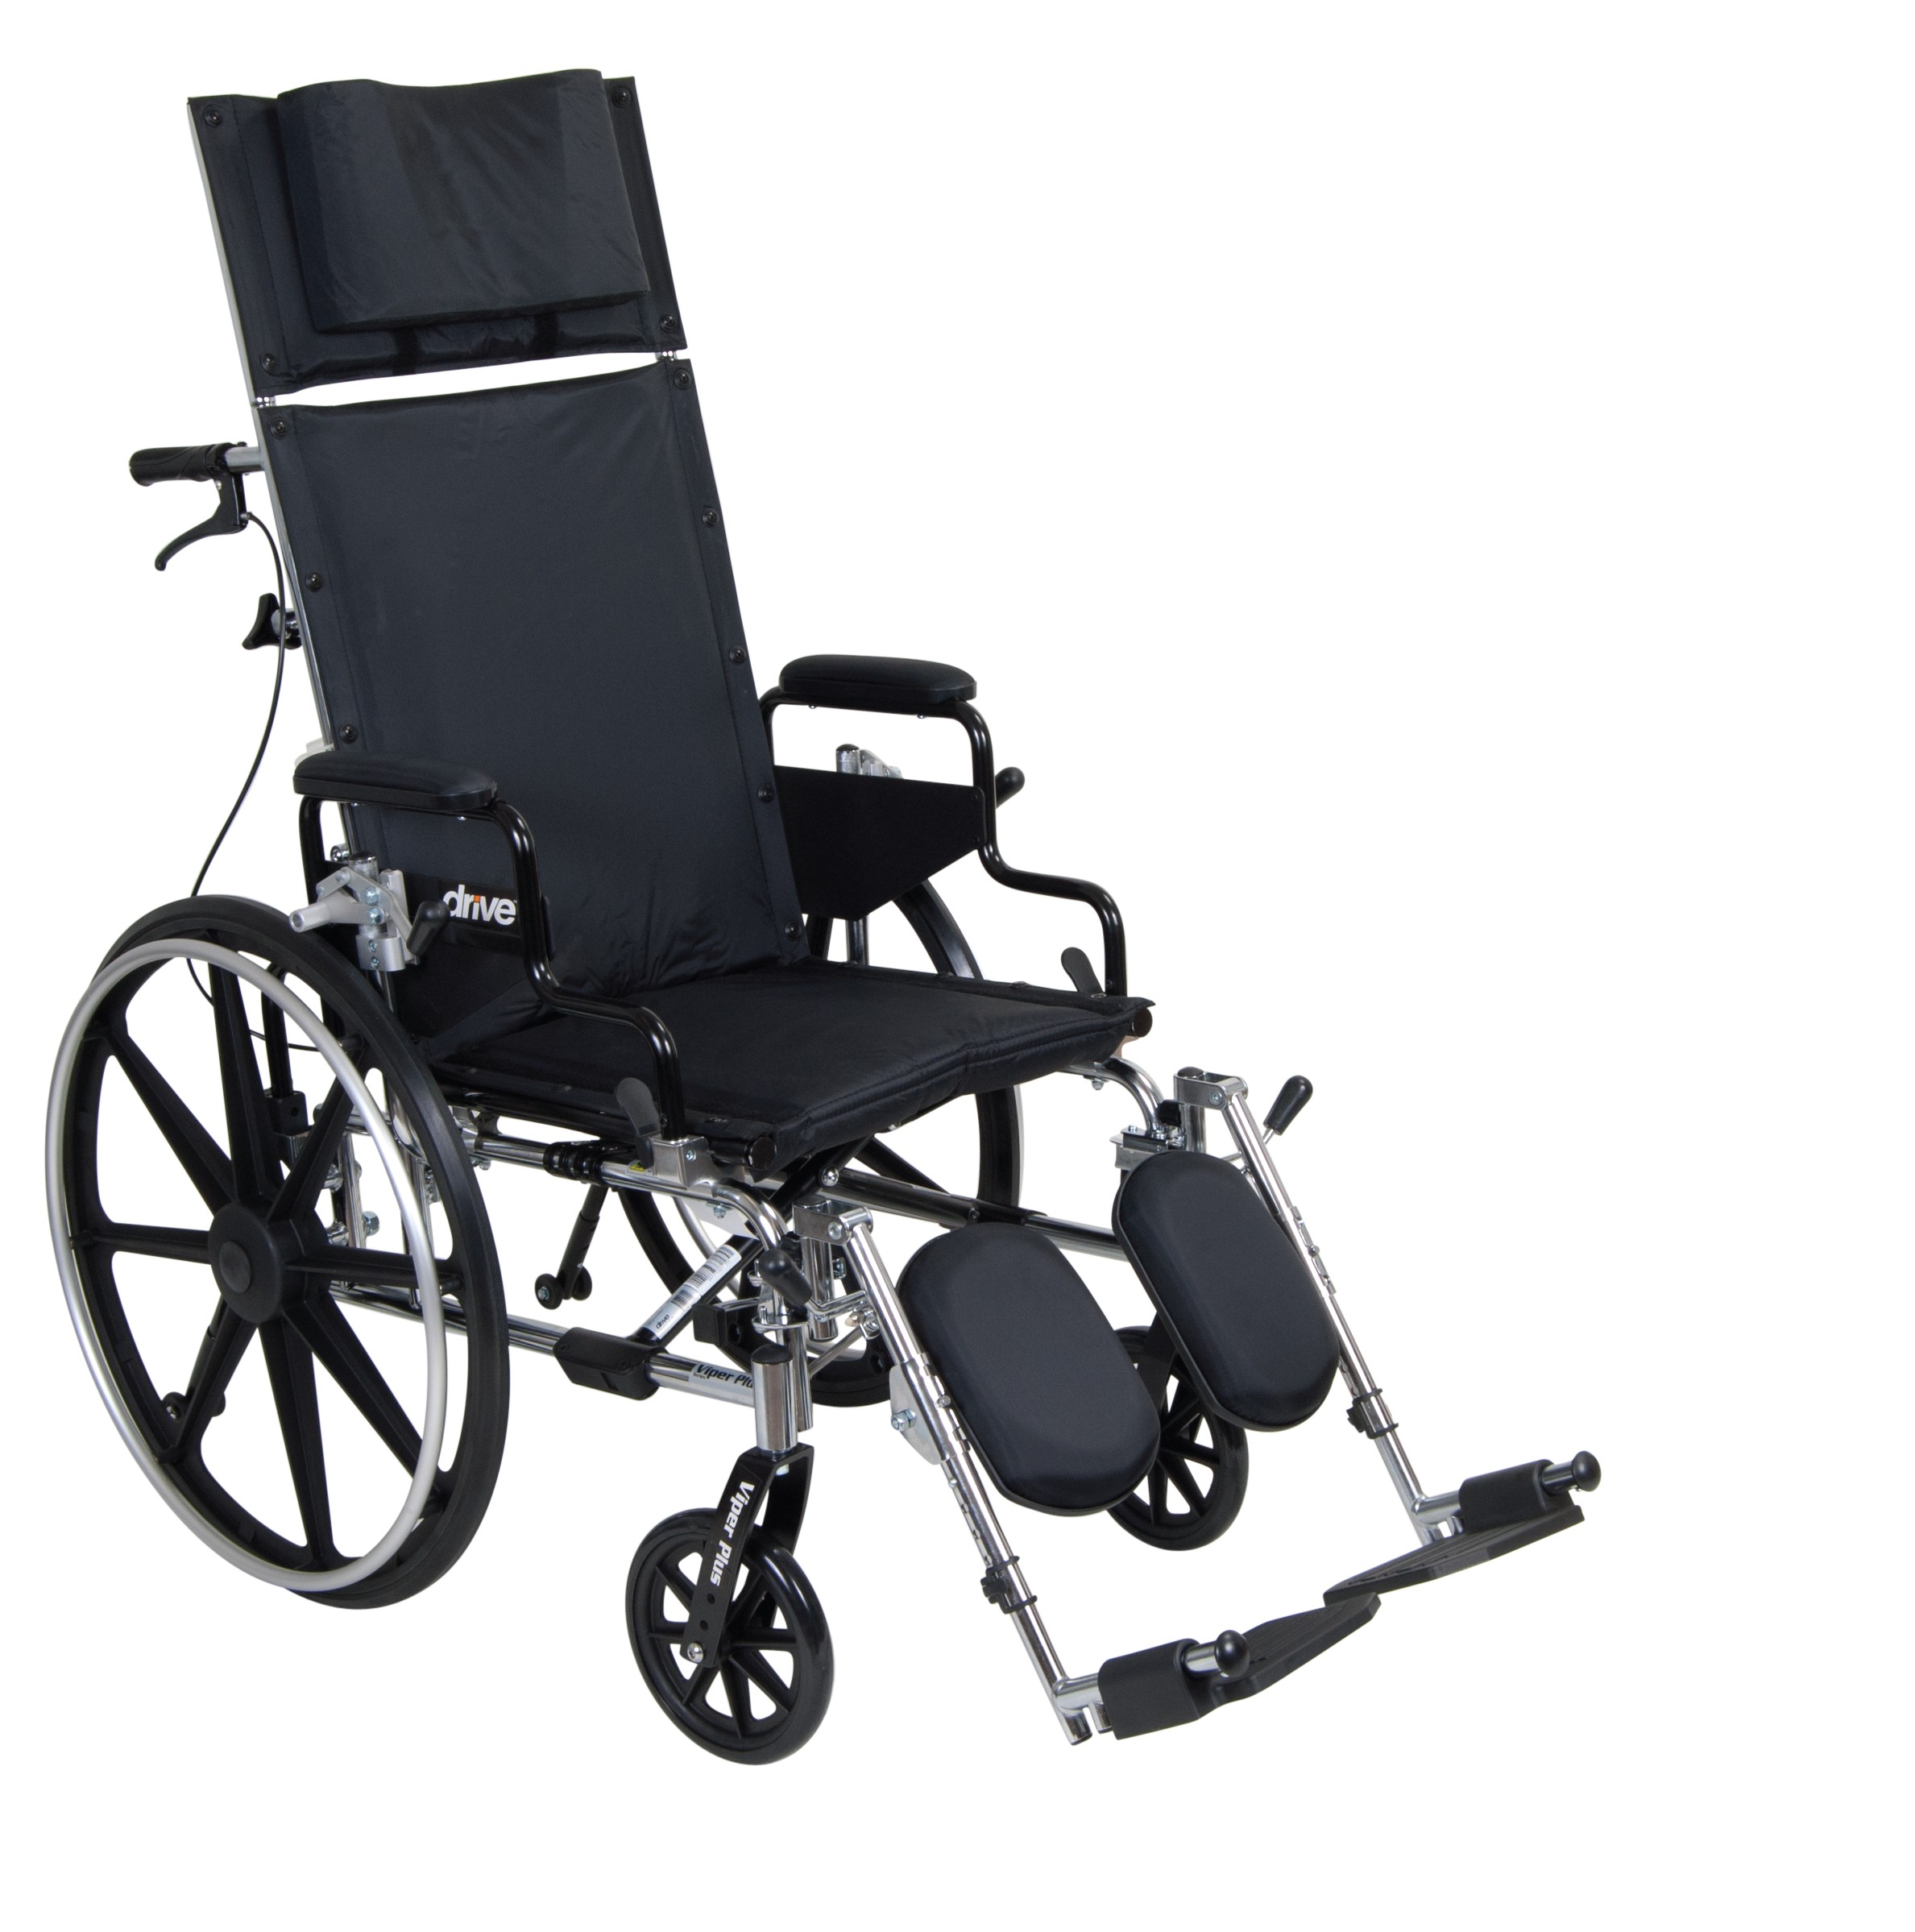 Reclining Wheelchairs Products, Supplies and Equipment